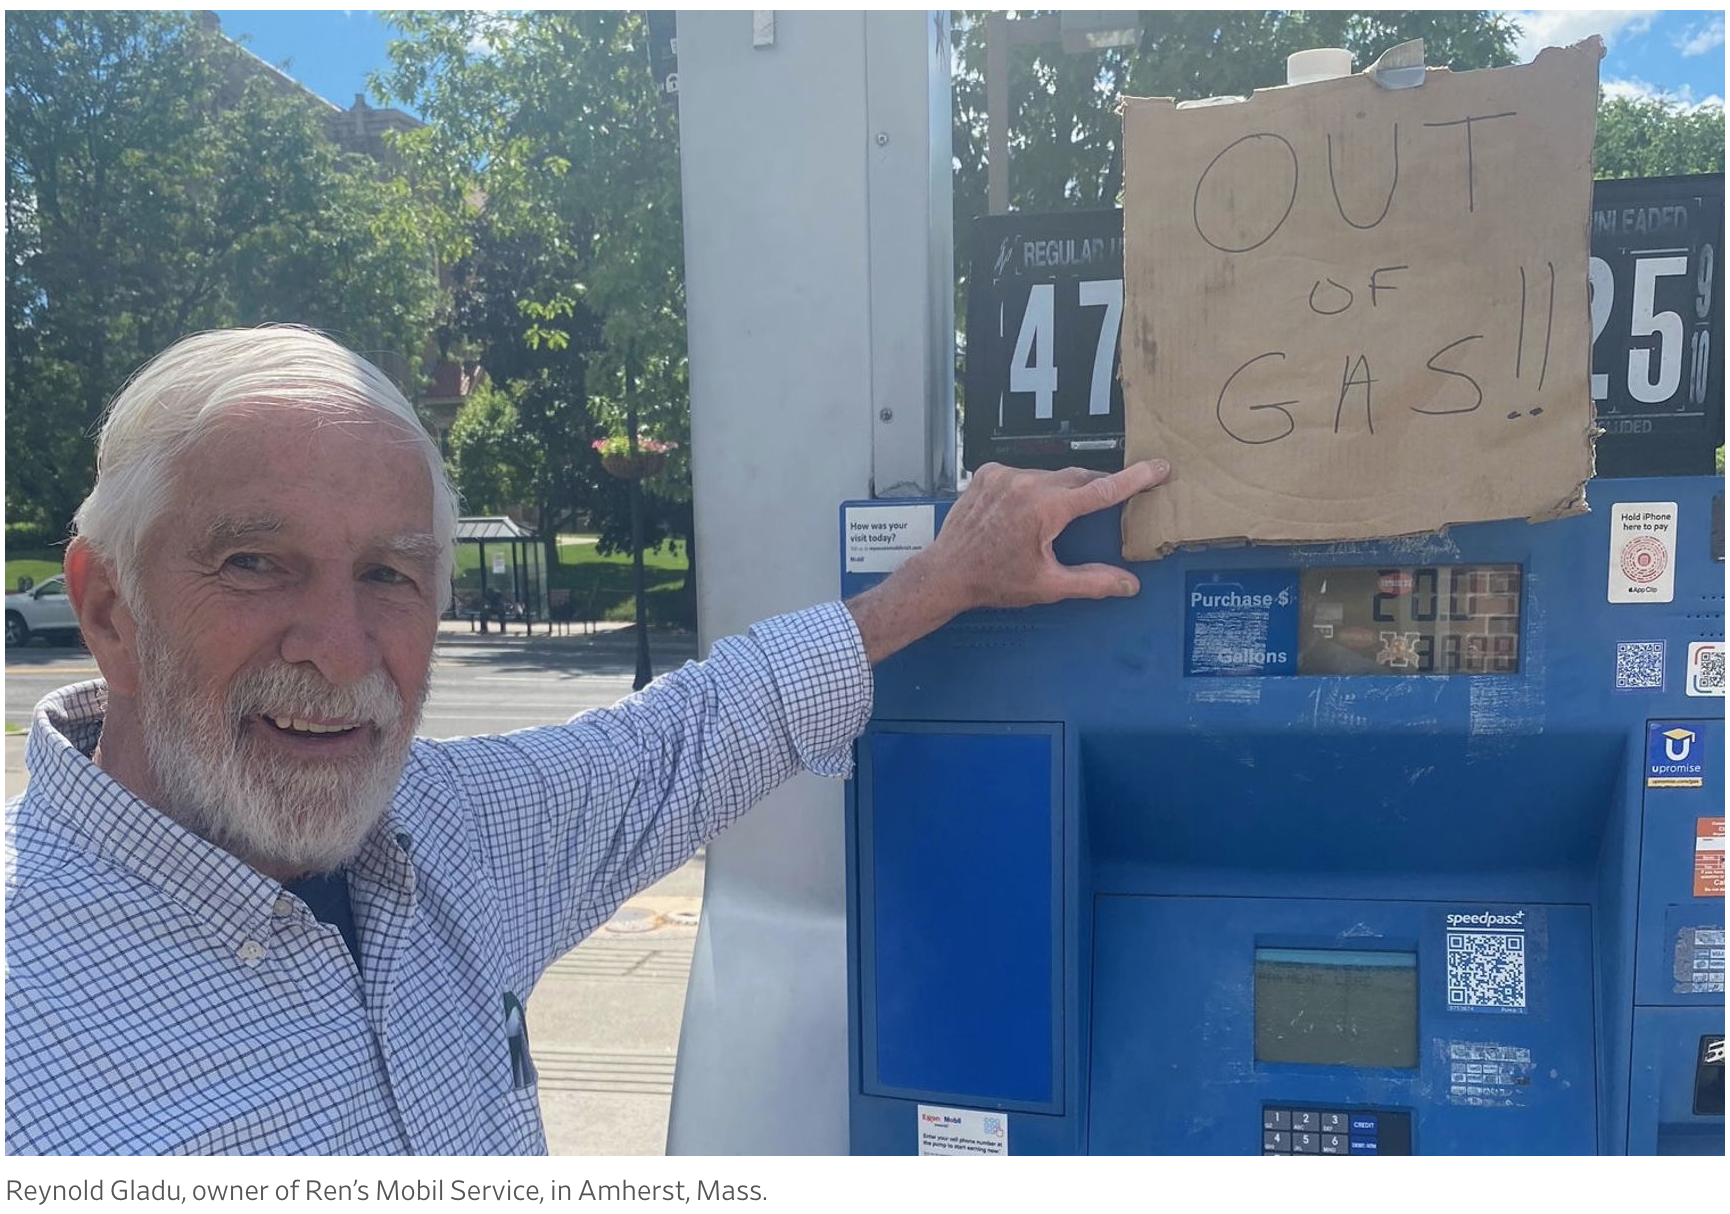 Gas Station Owner In Massachusetts Shuts Pumps To Protest Prices